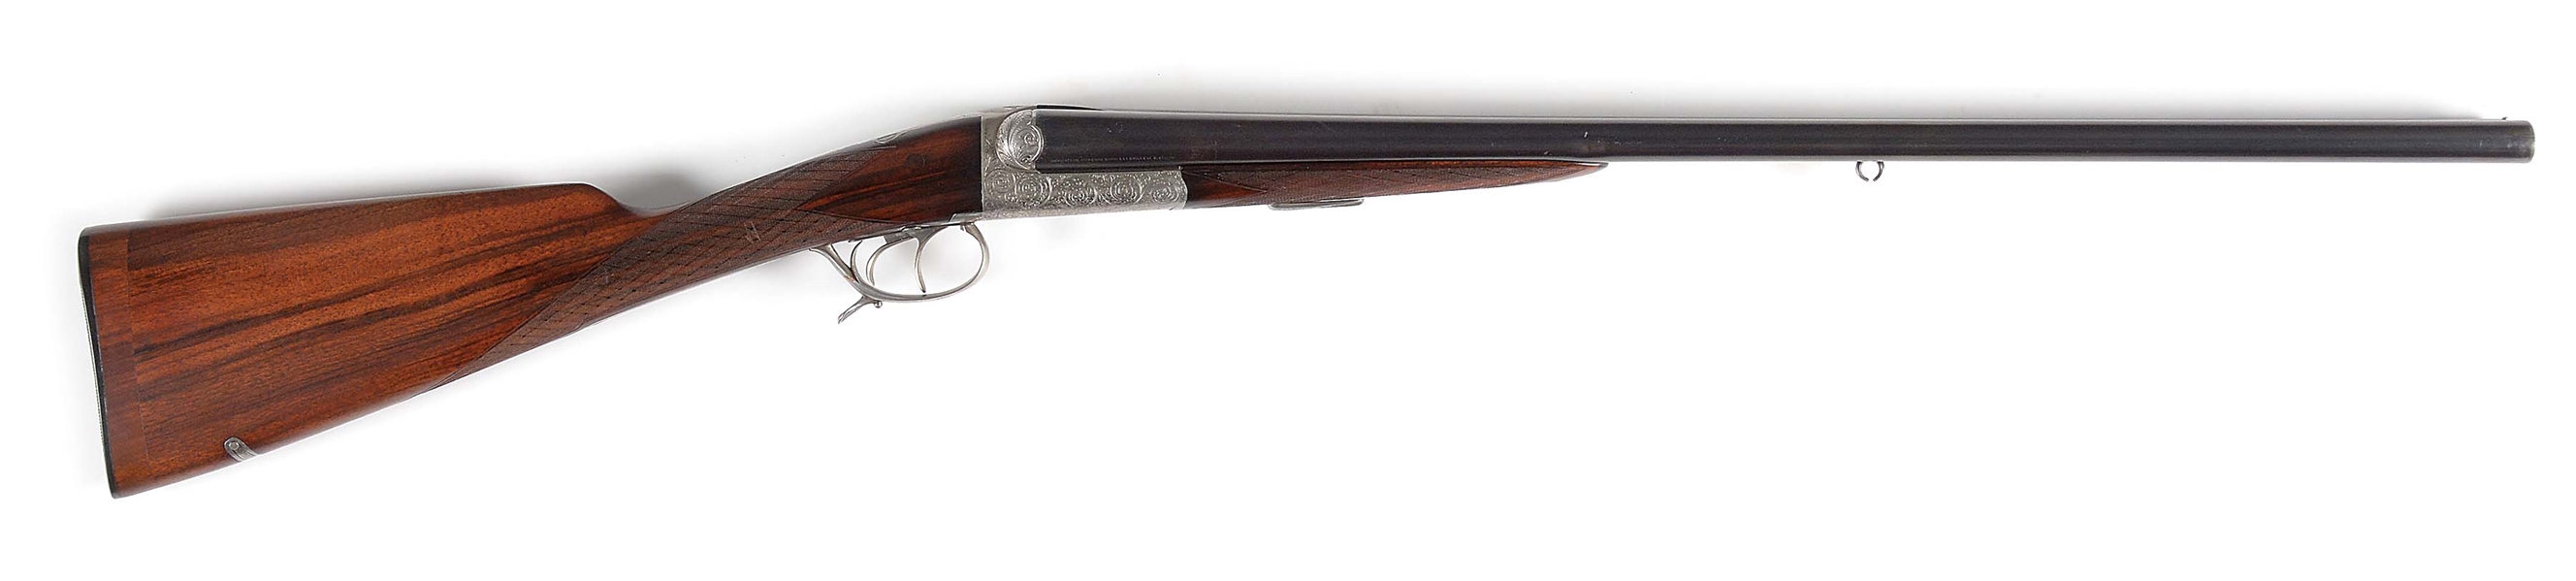 (C) WELL ENGINEERED AND VERY INTERESTING HIGH QUALITY GRADE 5 MANUFRANCE "IDEAL" UNDER LEVER RIFLE/ SHOTGUN.